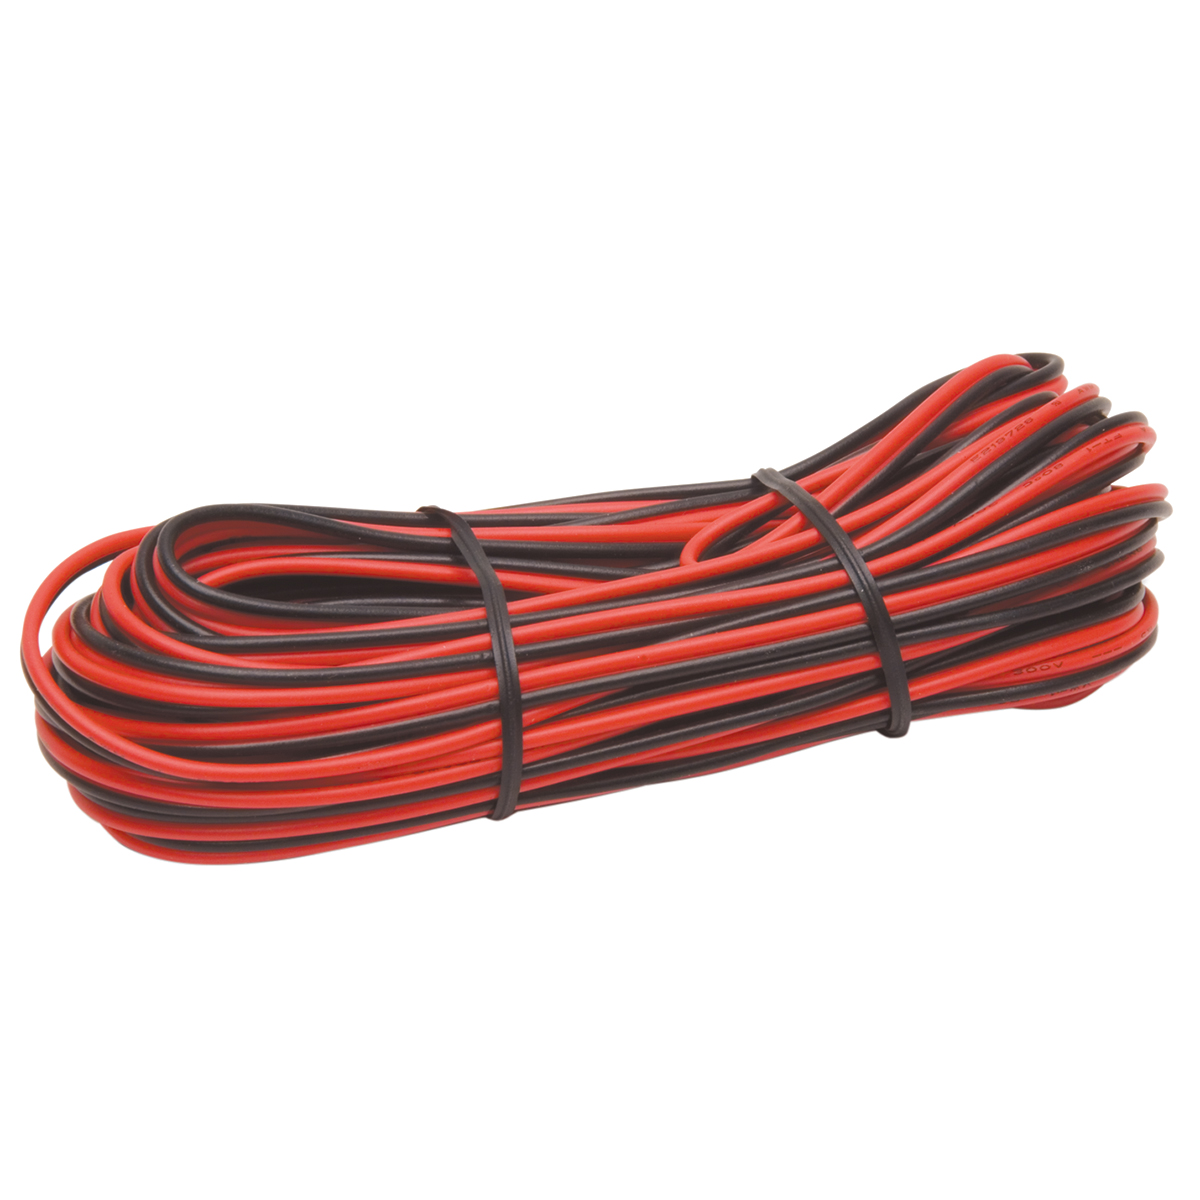 TruckSpec 25FT Hardwire Replacement 22-Gauge 2 Wire TSCBH-25 Parallel Wire CB Power Red and Black 22GA